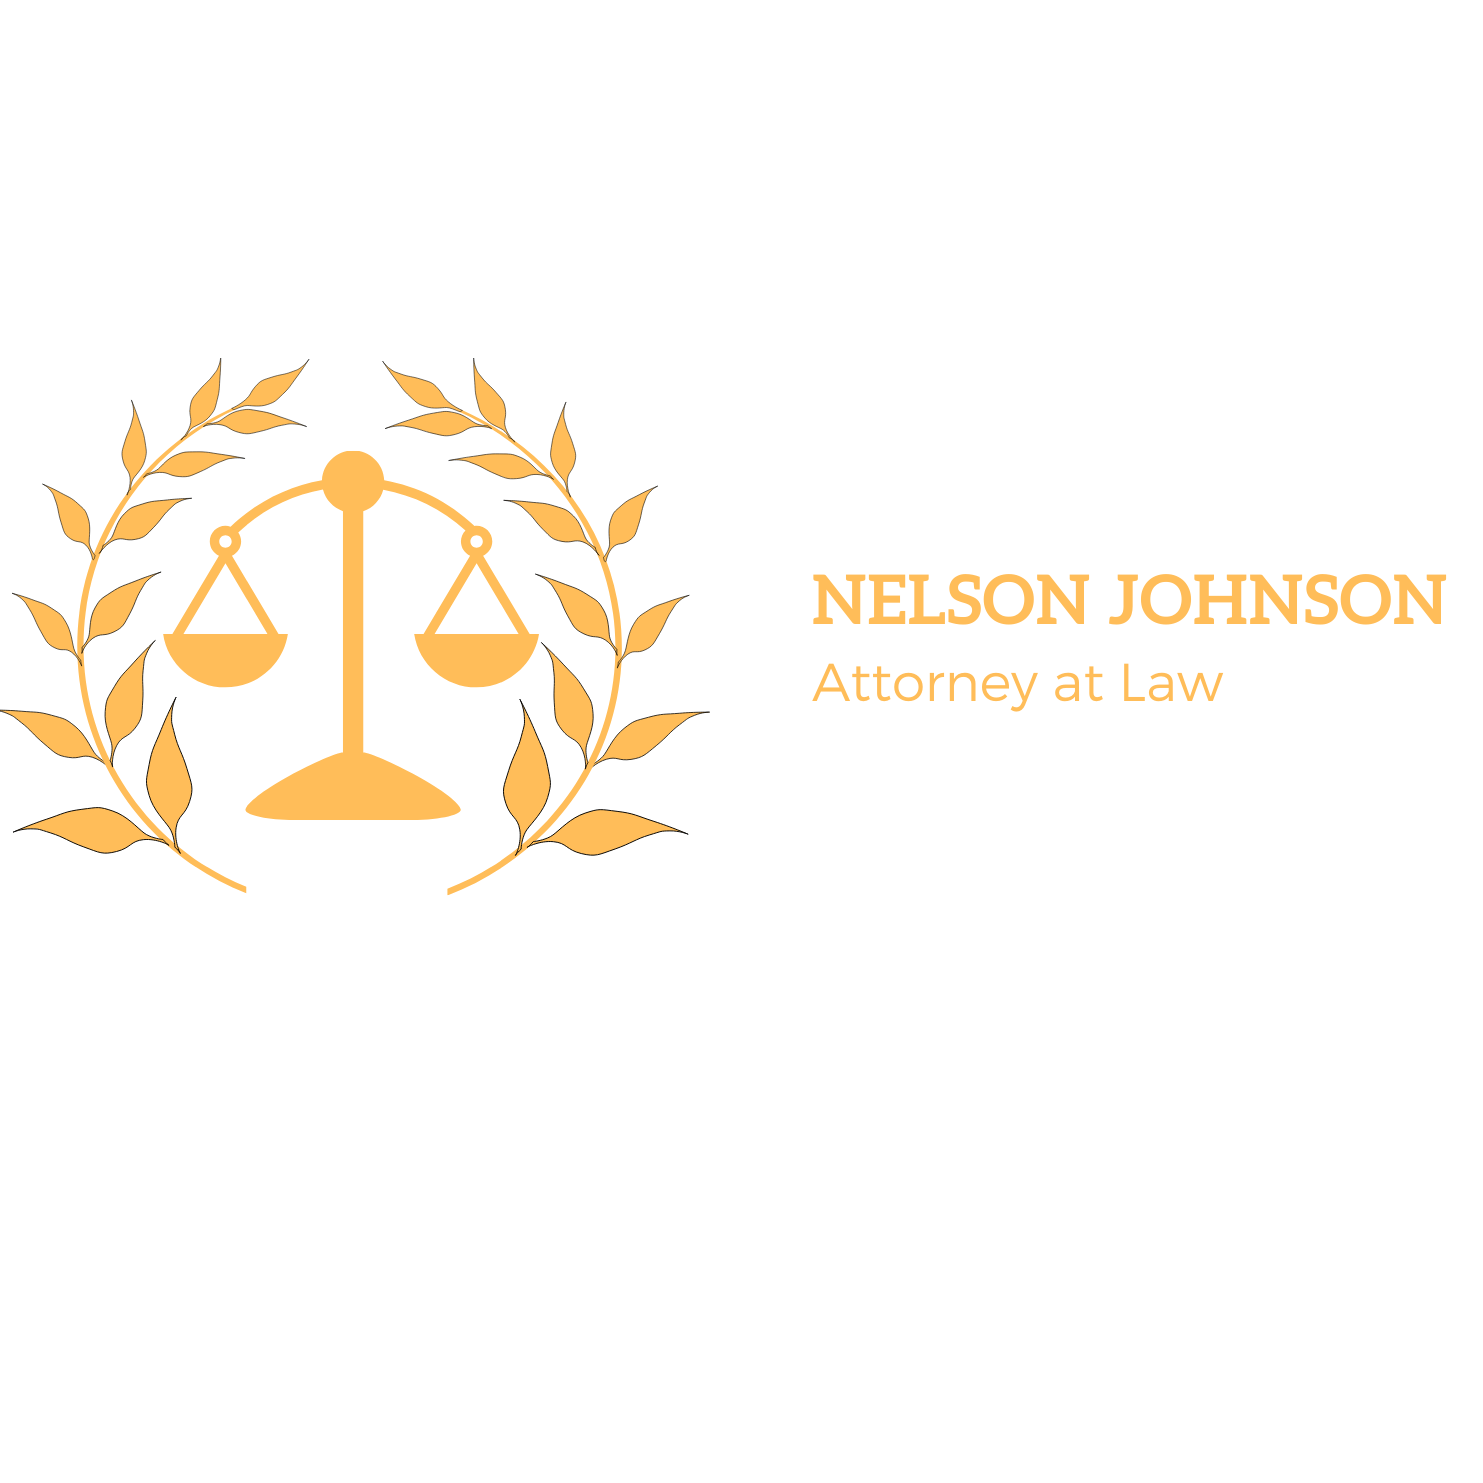 Nelson Johnson, Attorney at Law